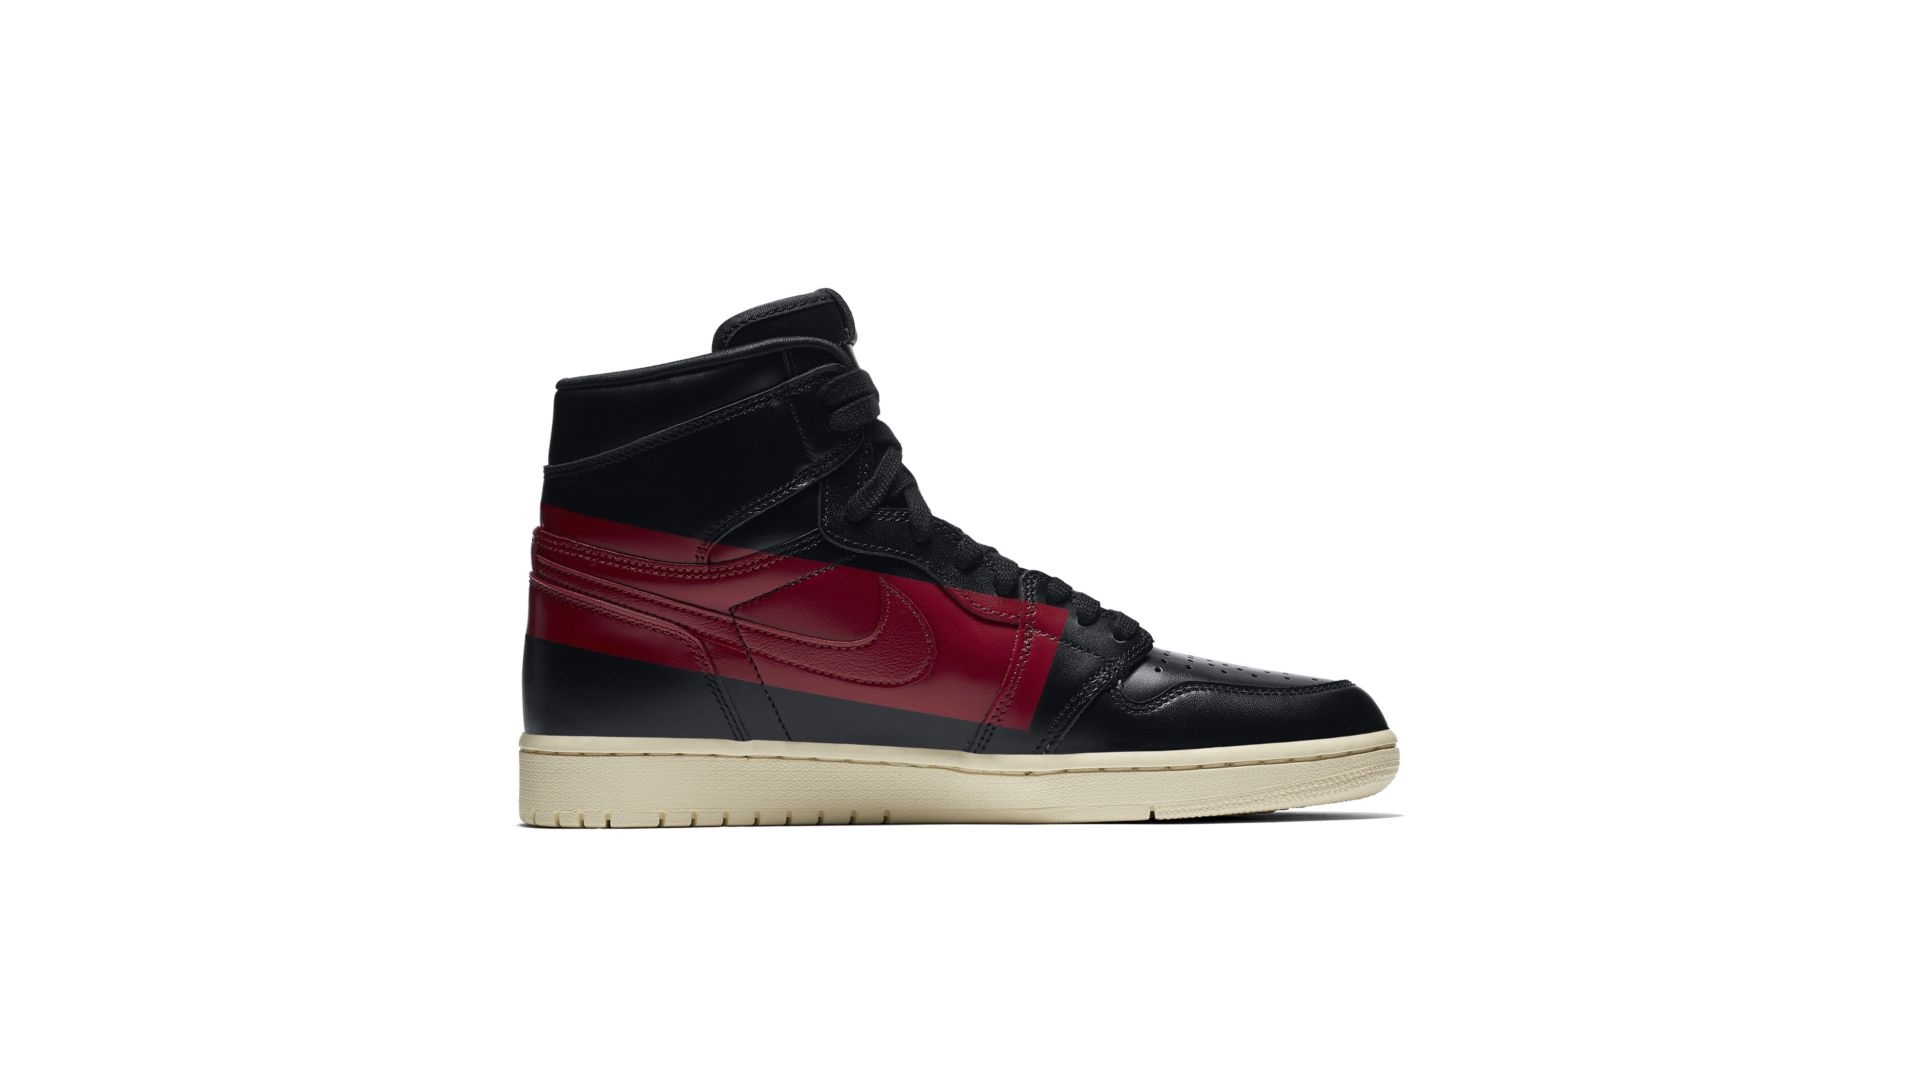 jordan 1 couture where to buy